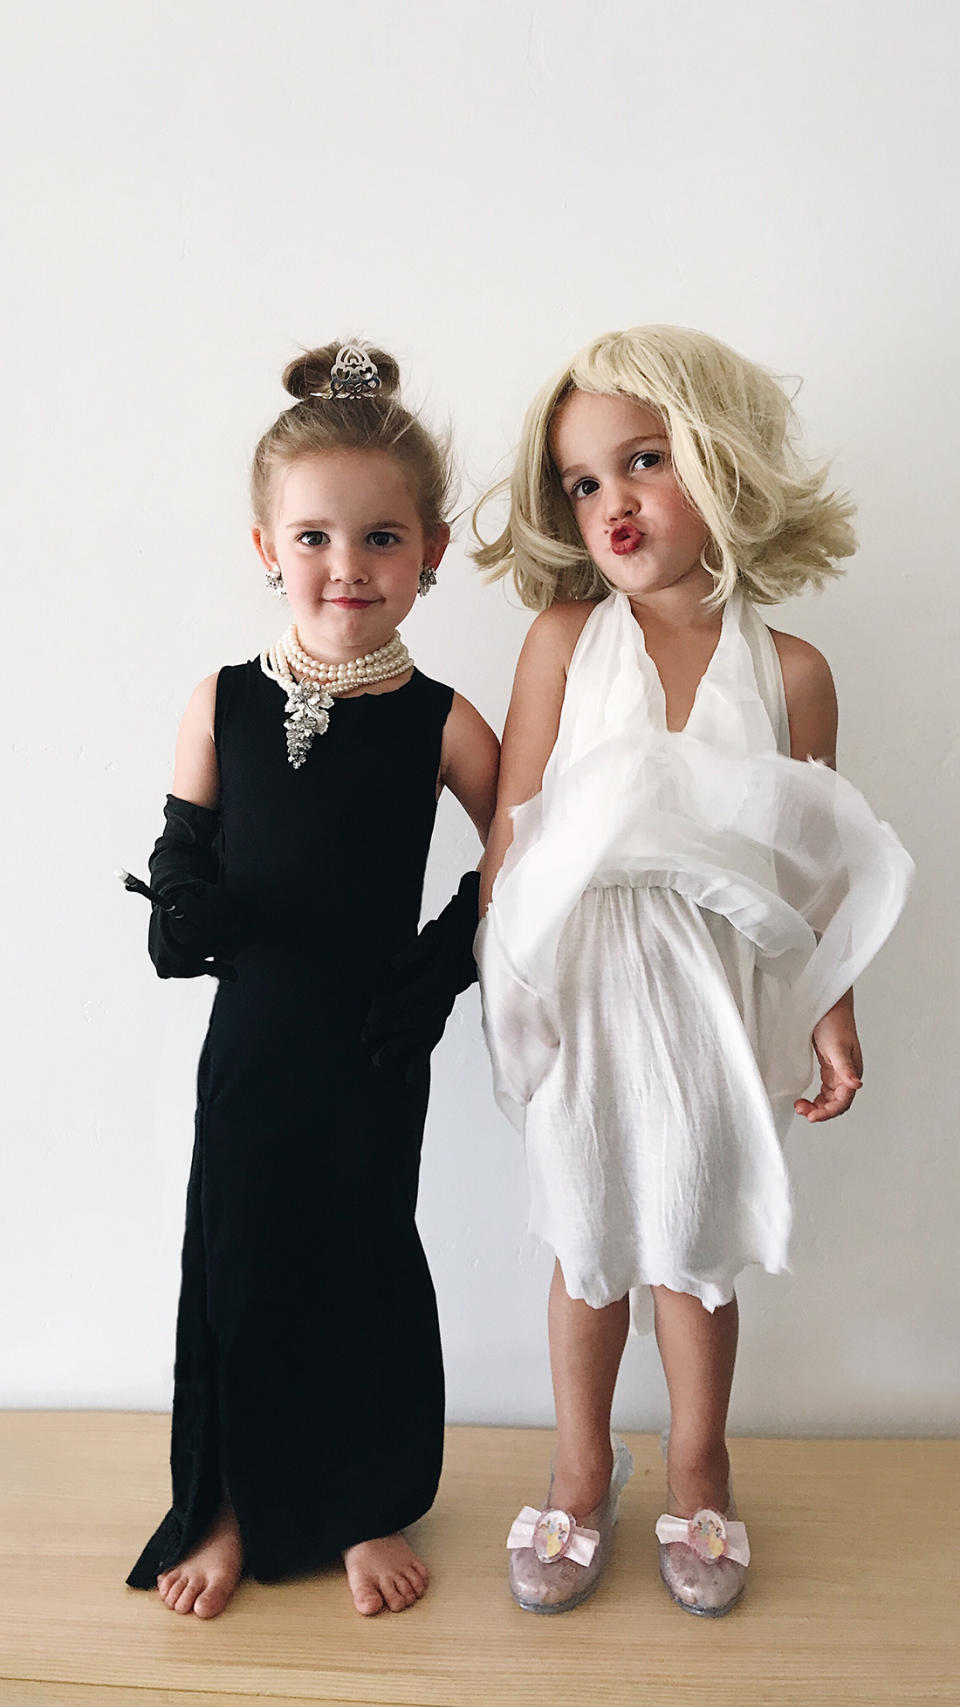 Let's play dress-up! Emma and Mila as Audrey Hepburn and Marilyn Monroe. (Photo courtesy of K.C. Stauffer)